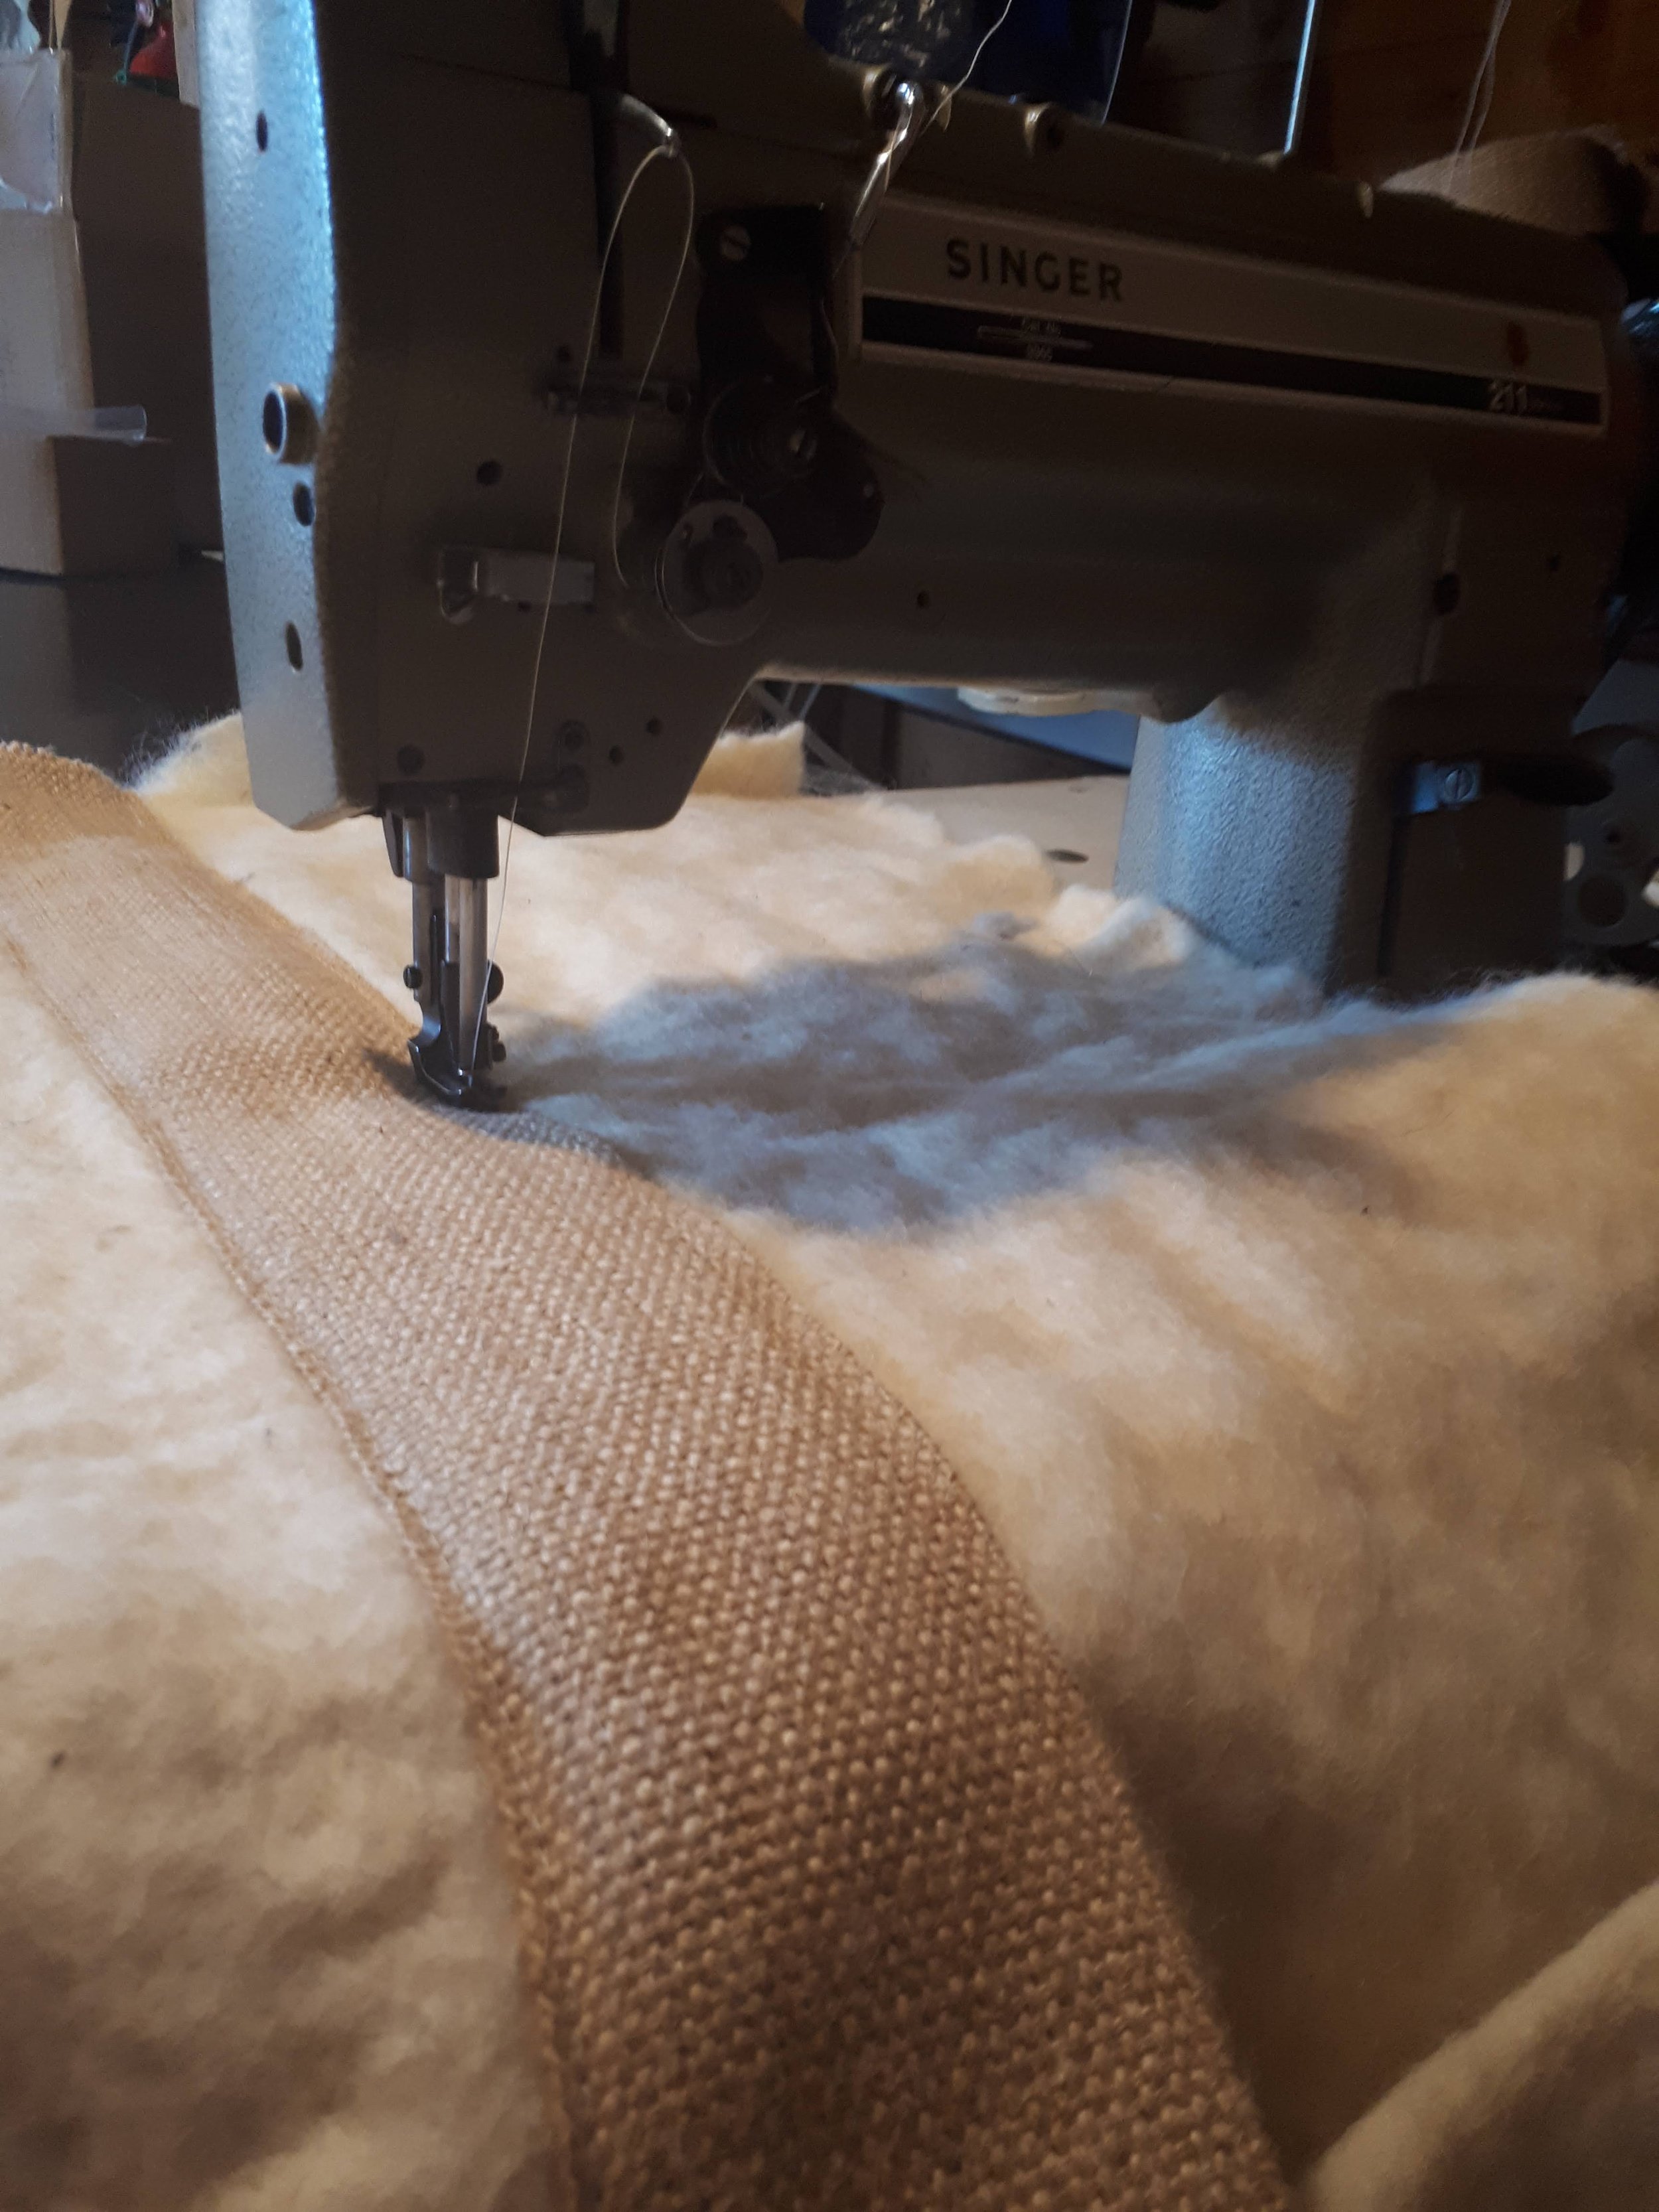 Feeling the warmth and softness of the wool whilst I sew is a real treat!